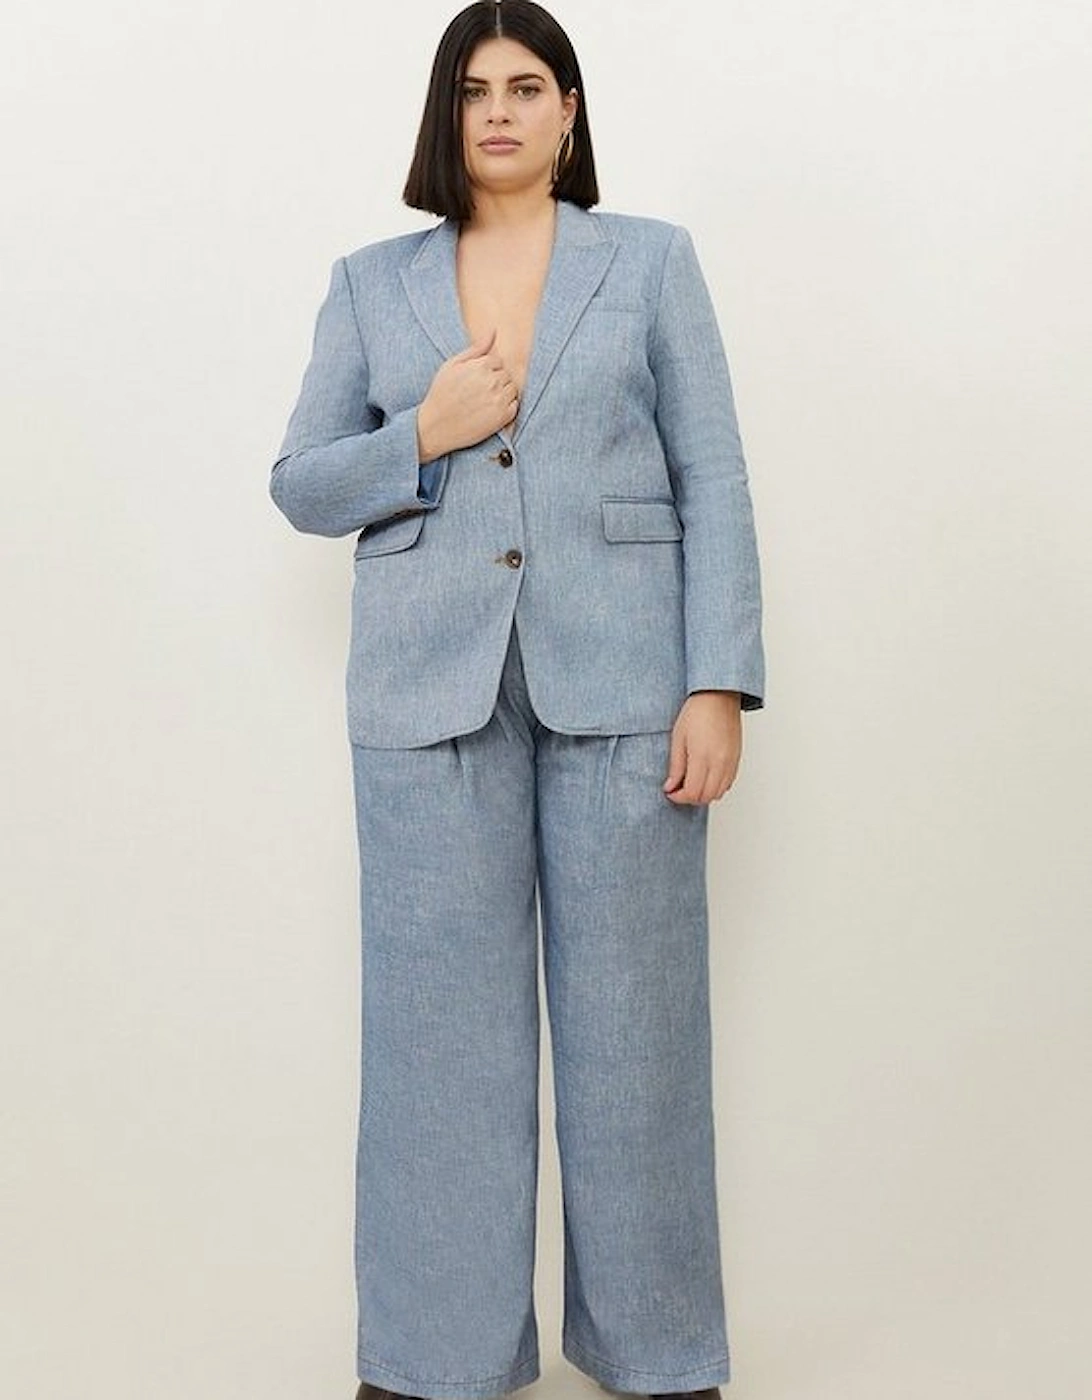 Plus Size Tailored Denim Look Linen Single Breasted Jacket